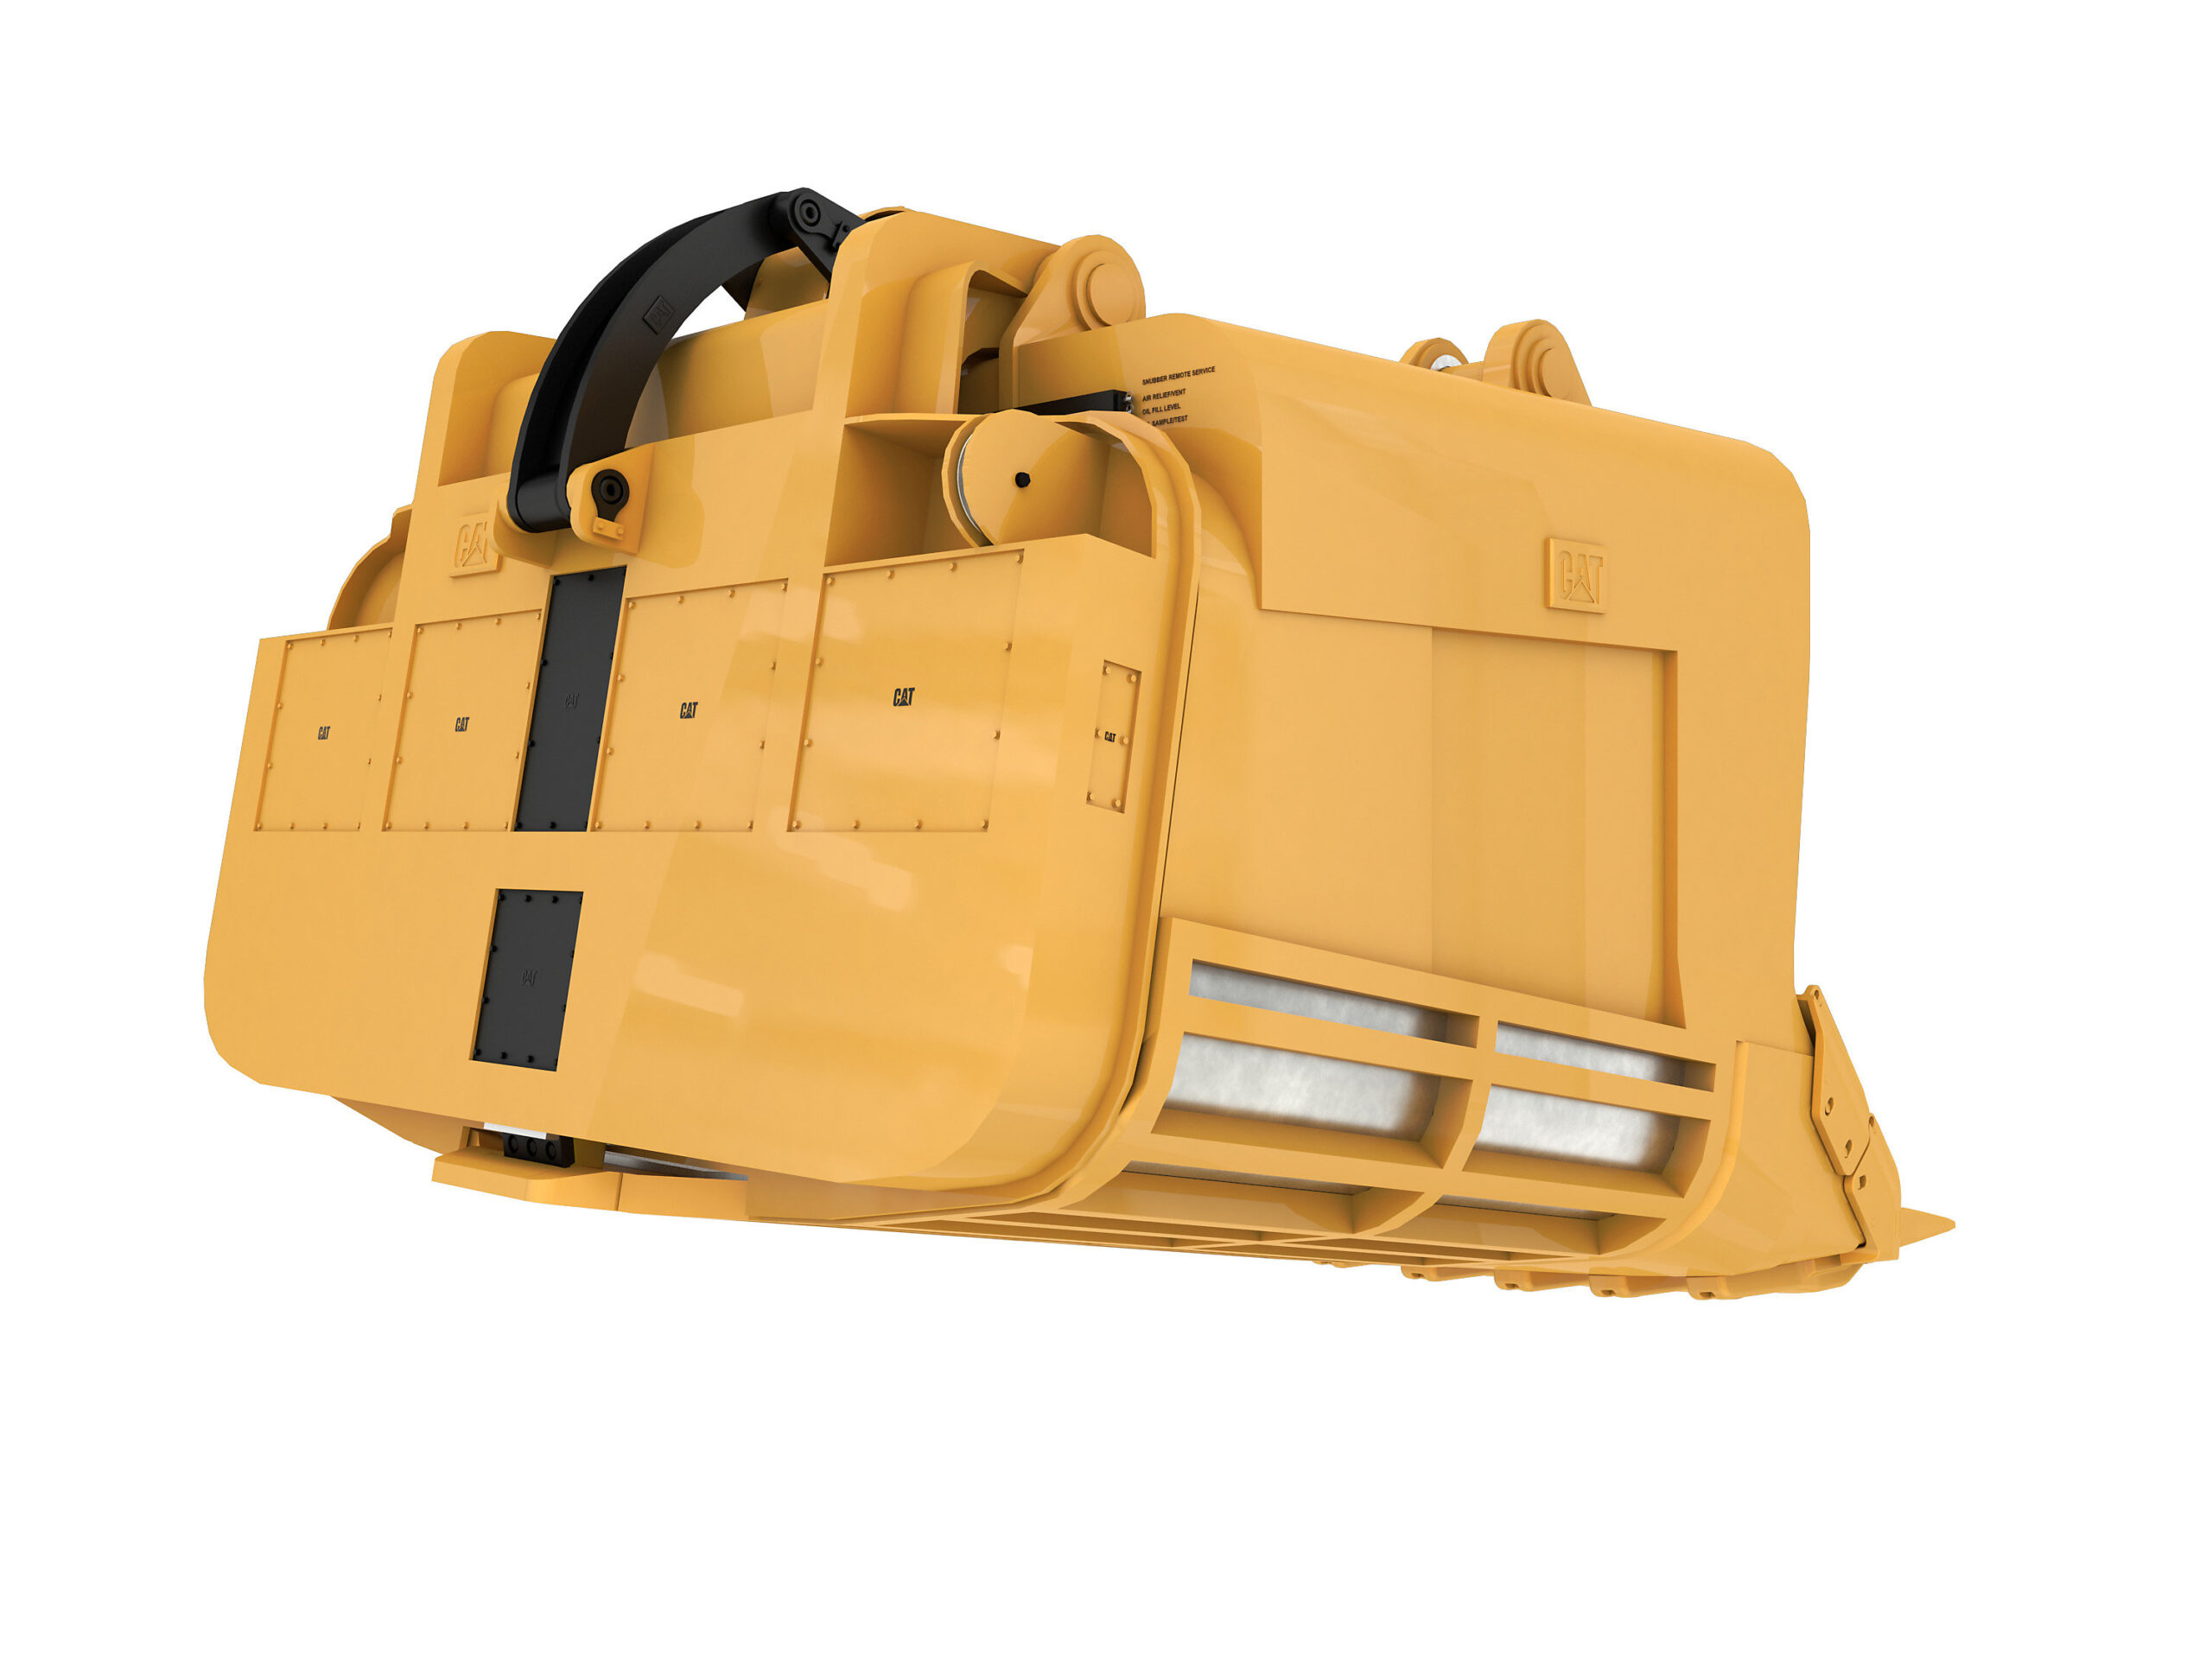 The New Cat 7495 Hf Electric Rope Shovels Australia Heavyquip Journal